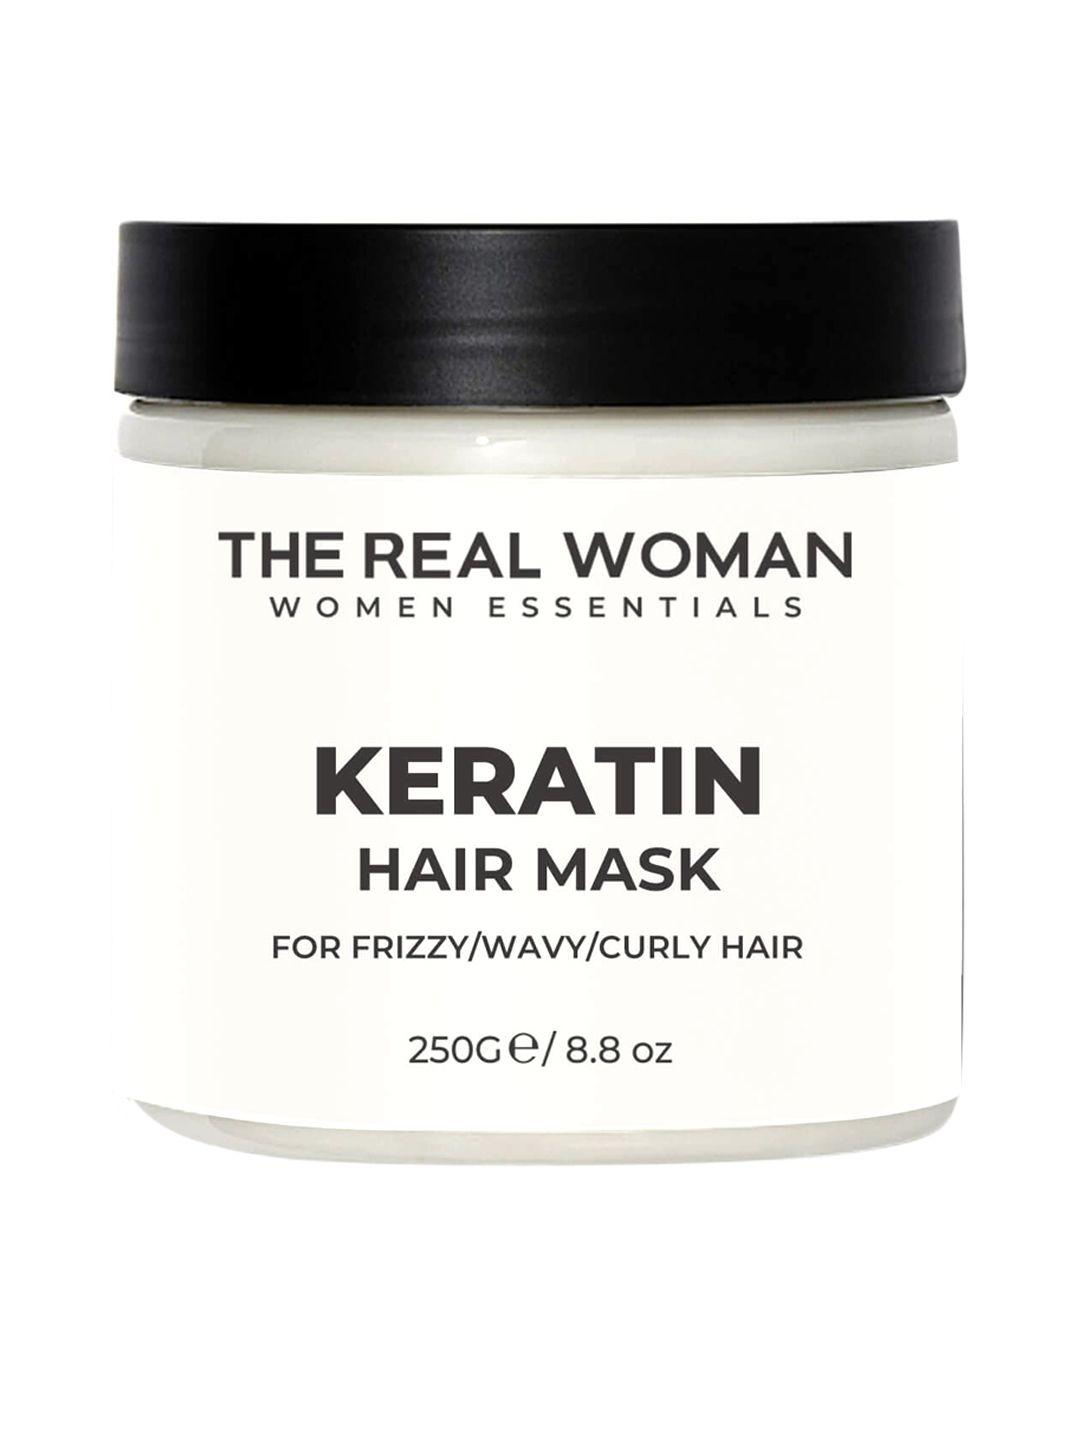 the real woman keratin hair mask for frizzy+wavy+curly hair - 200 gm